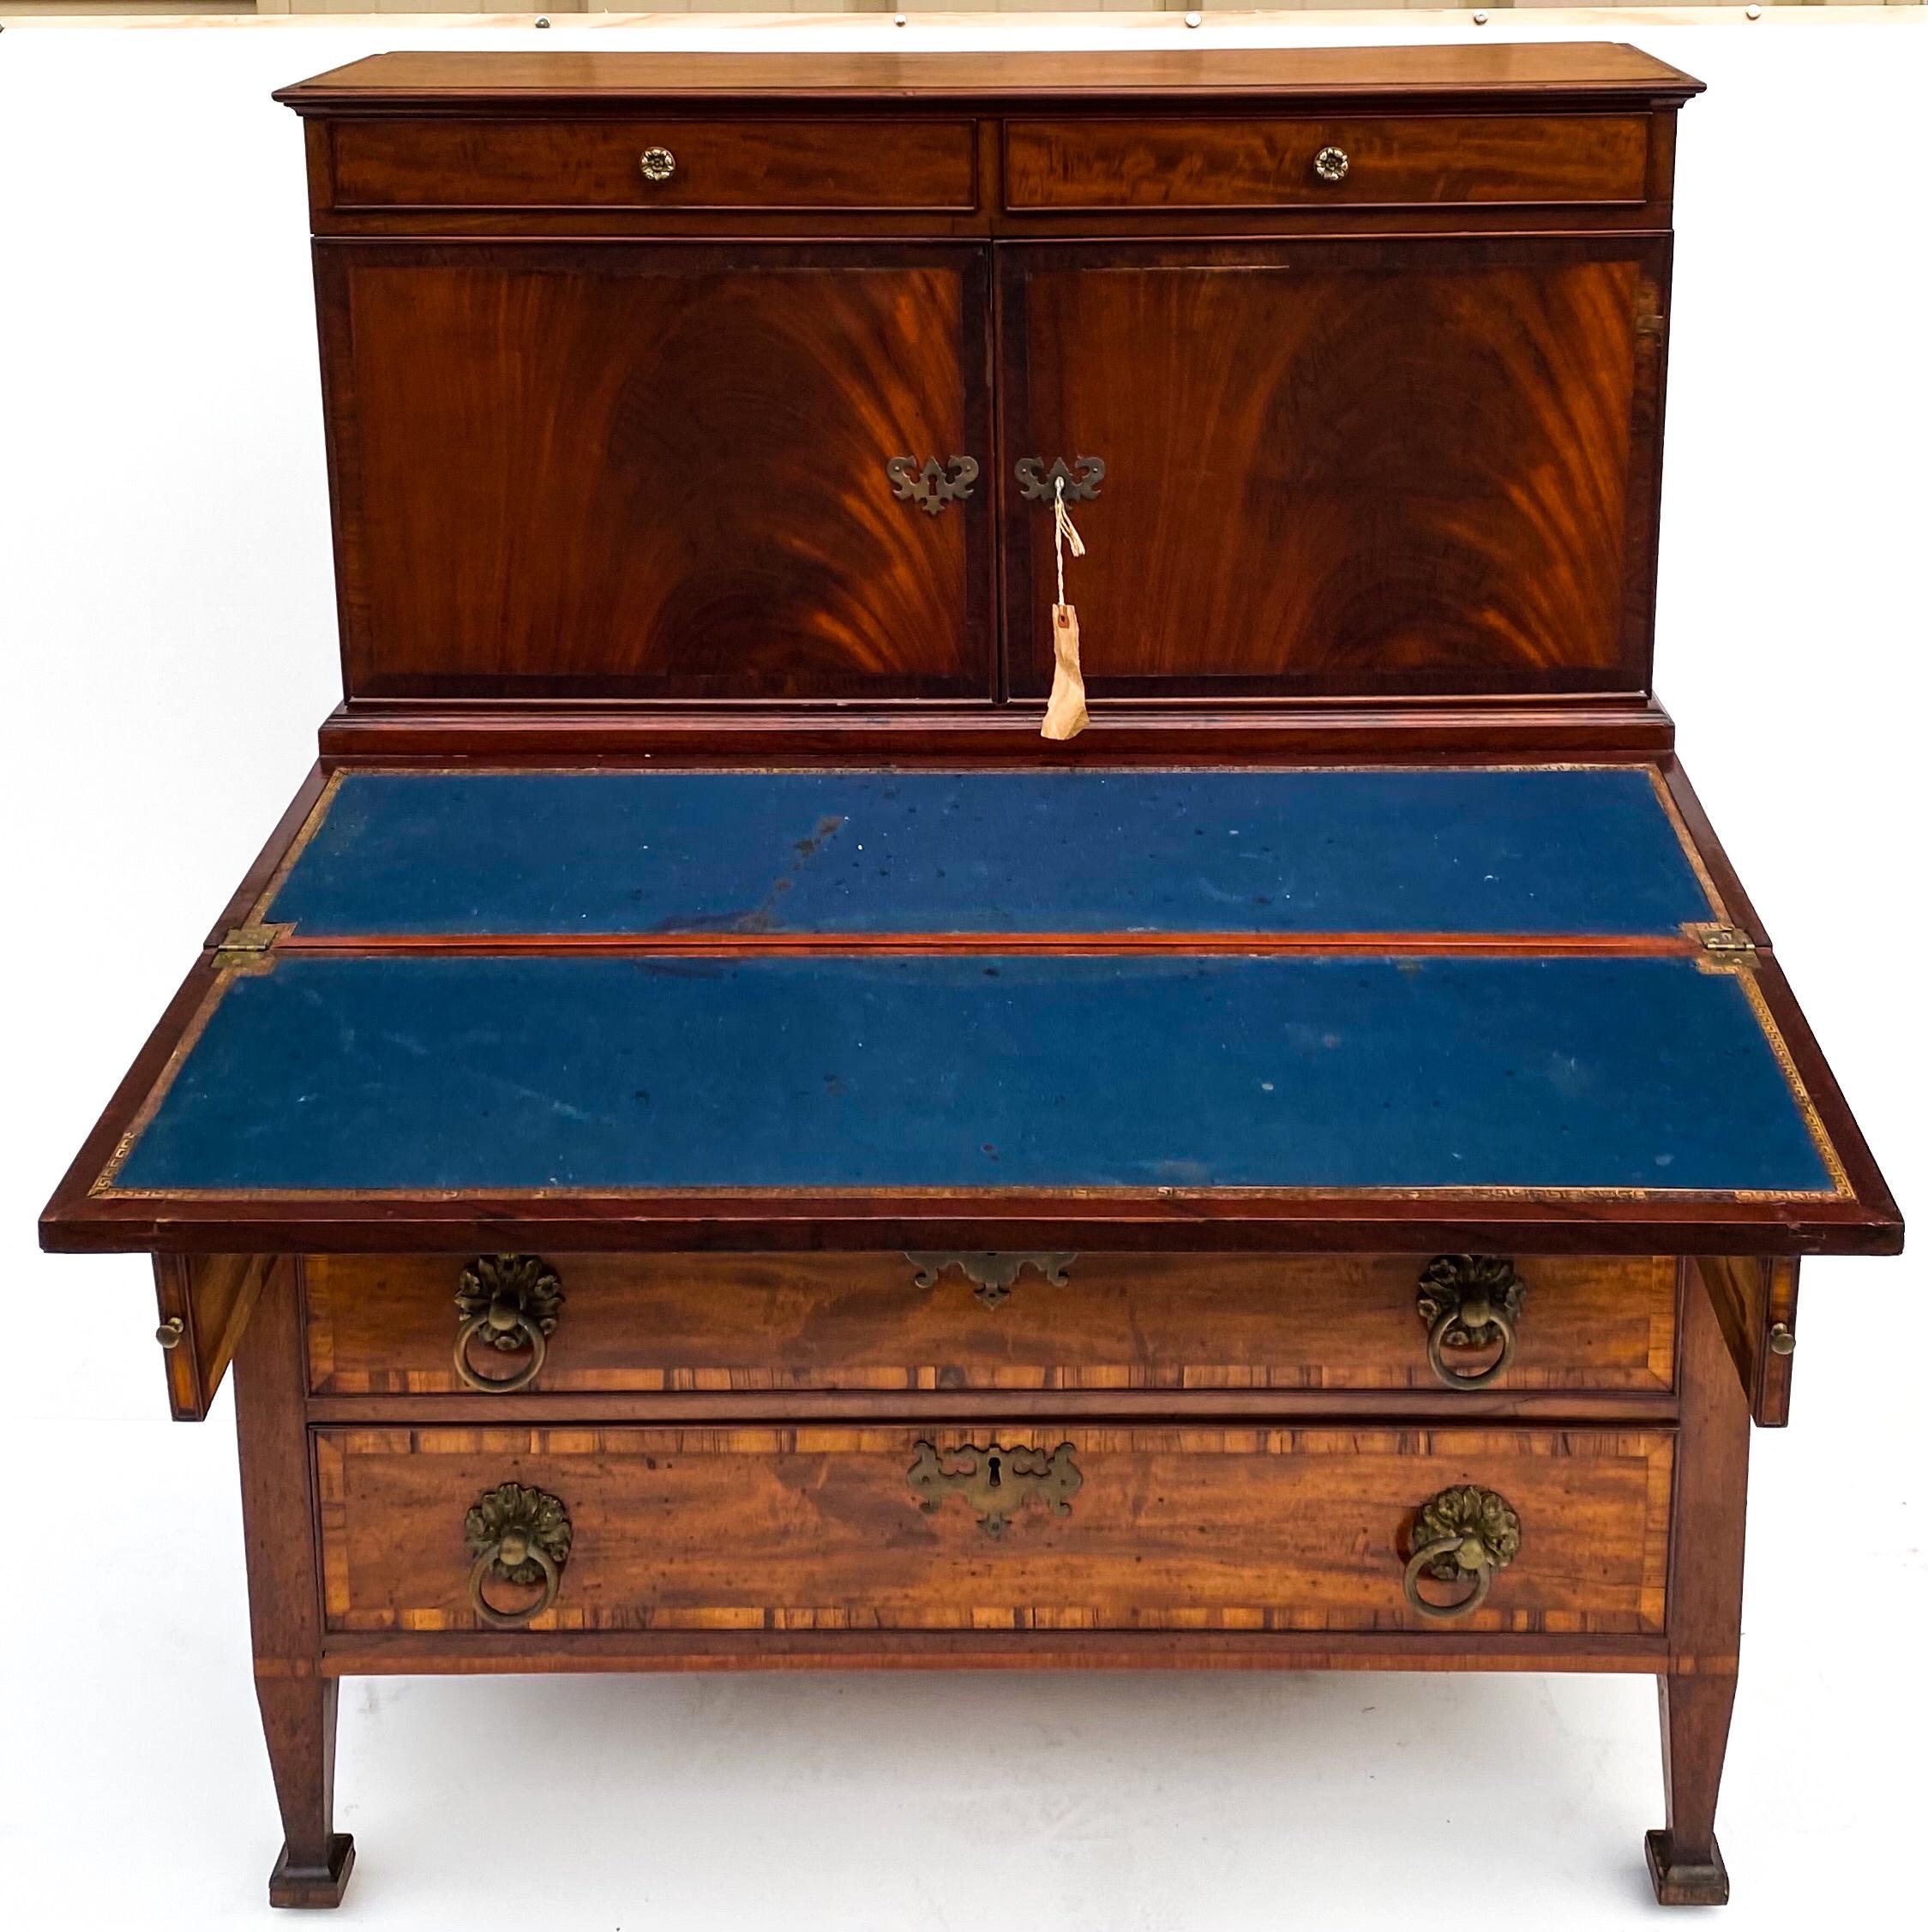 This is a 19th century English Sheraton style writing desk with mahogany and satinwood inlay. The door fronts are flame mahogany and open to storage. The three drawers have wonderful inlay, dovetail construction and original hardware. The piece